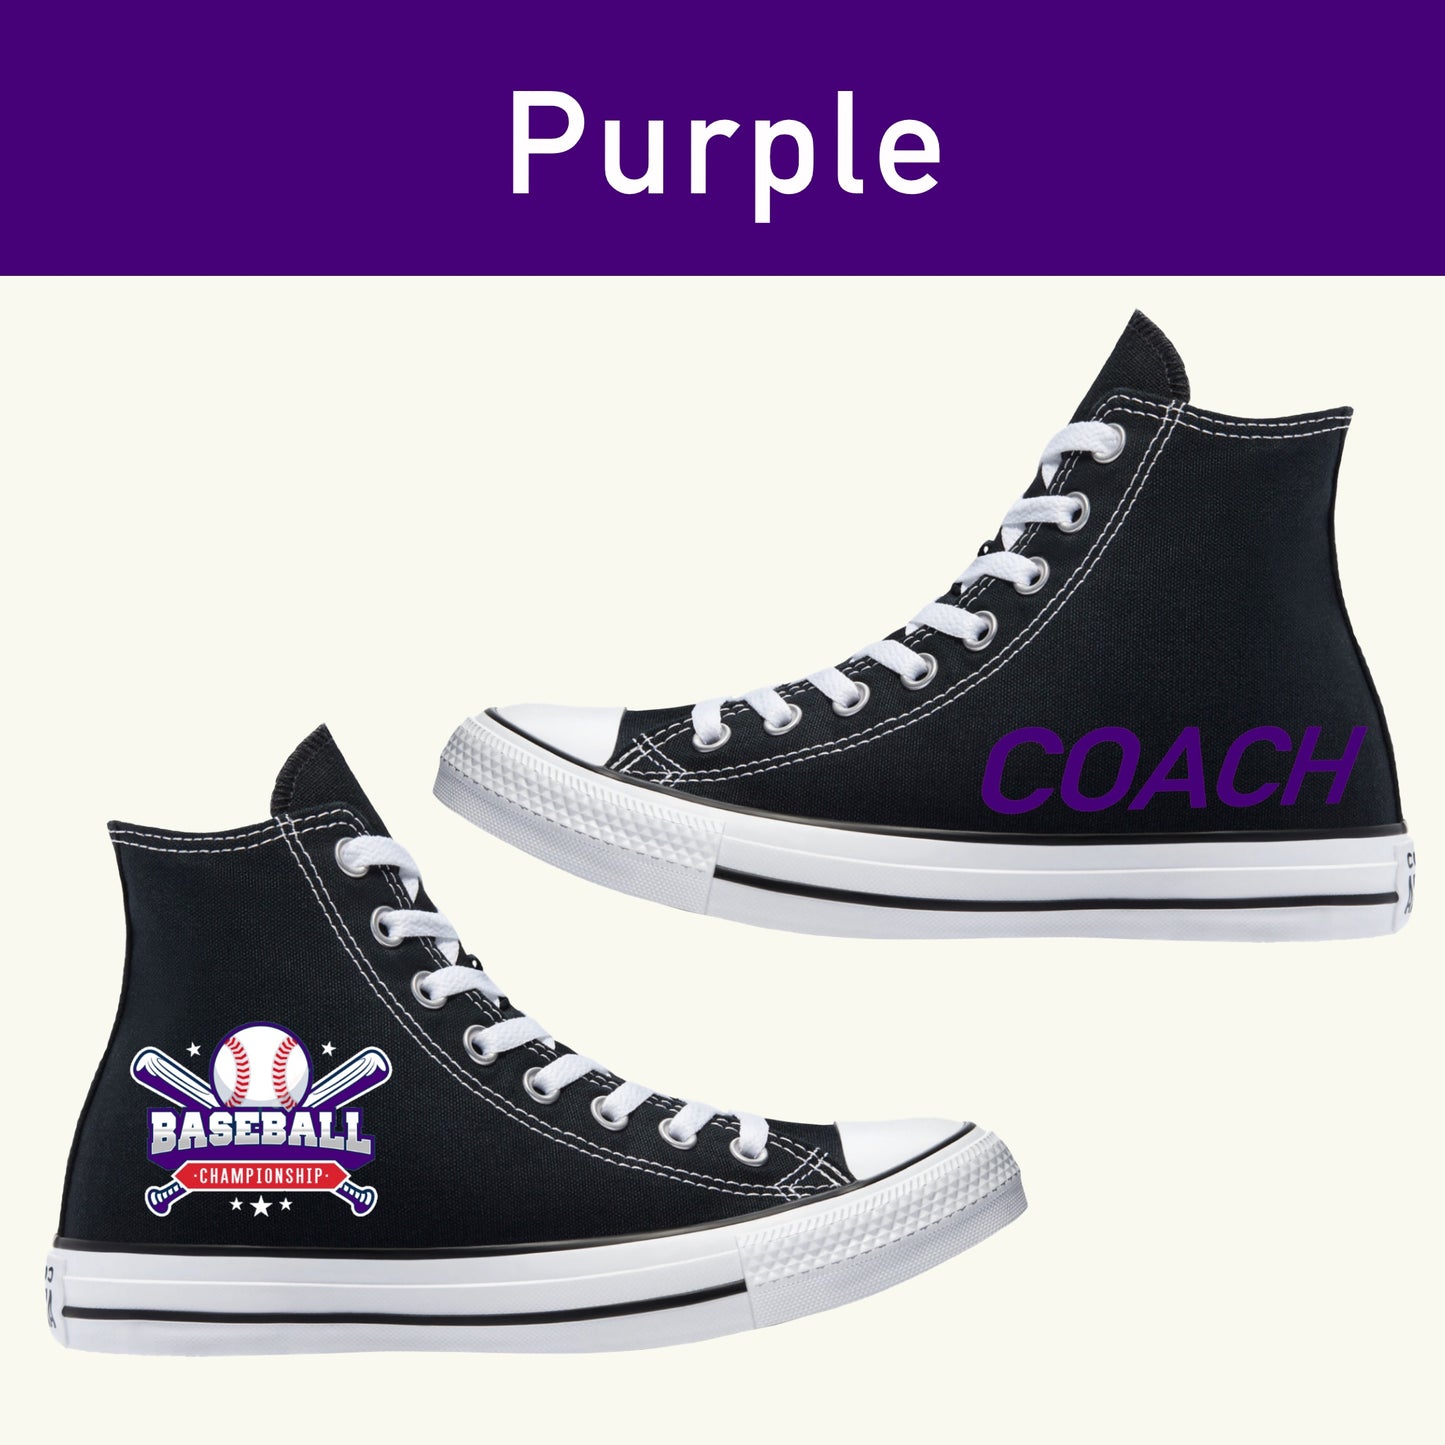 Baseball Sneakers Coaches Gift - Multiple Colors Available - Custom Converse Shoes